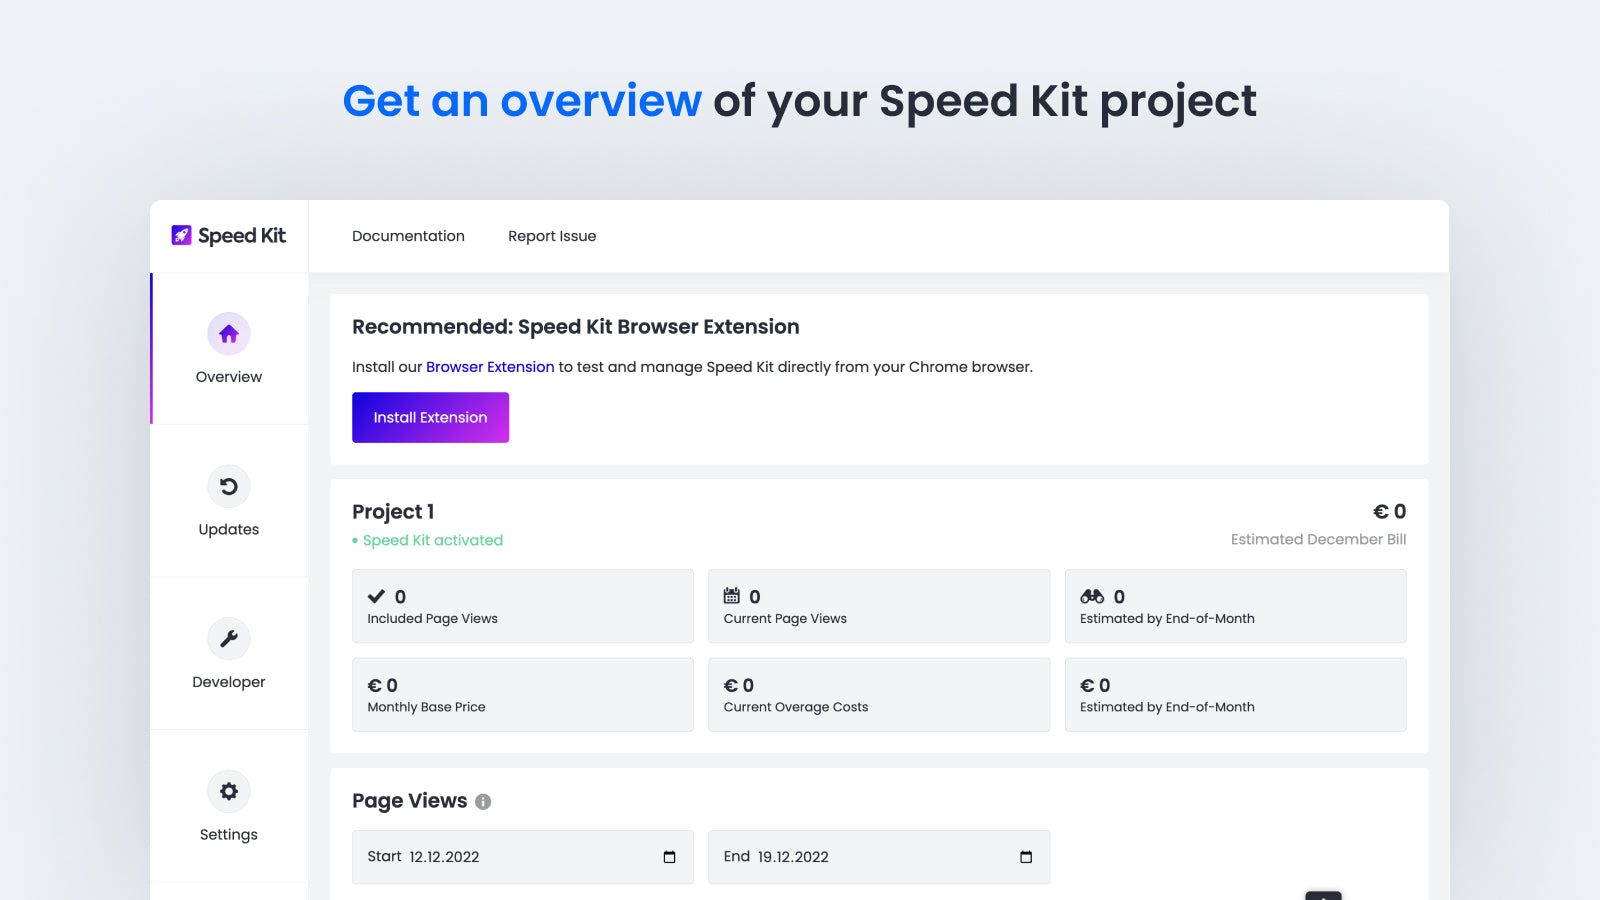 Get an overview of your Speed Kit project